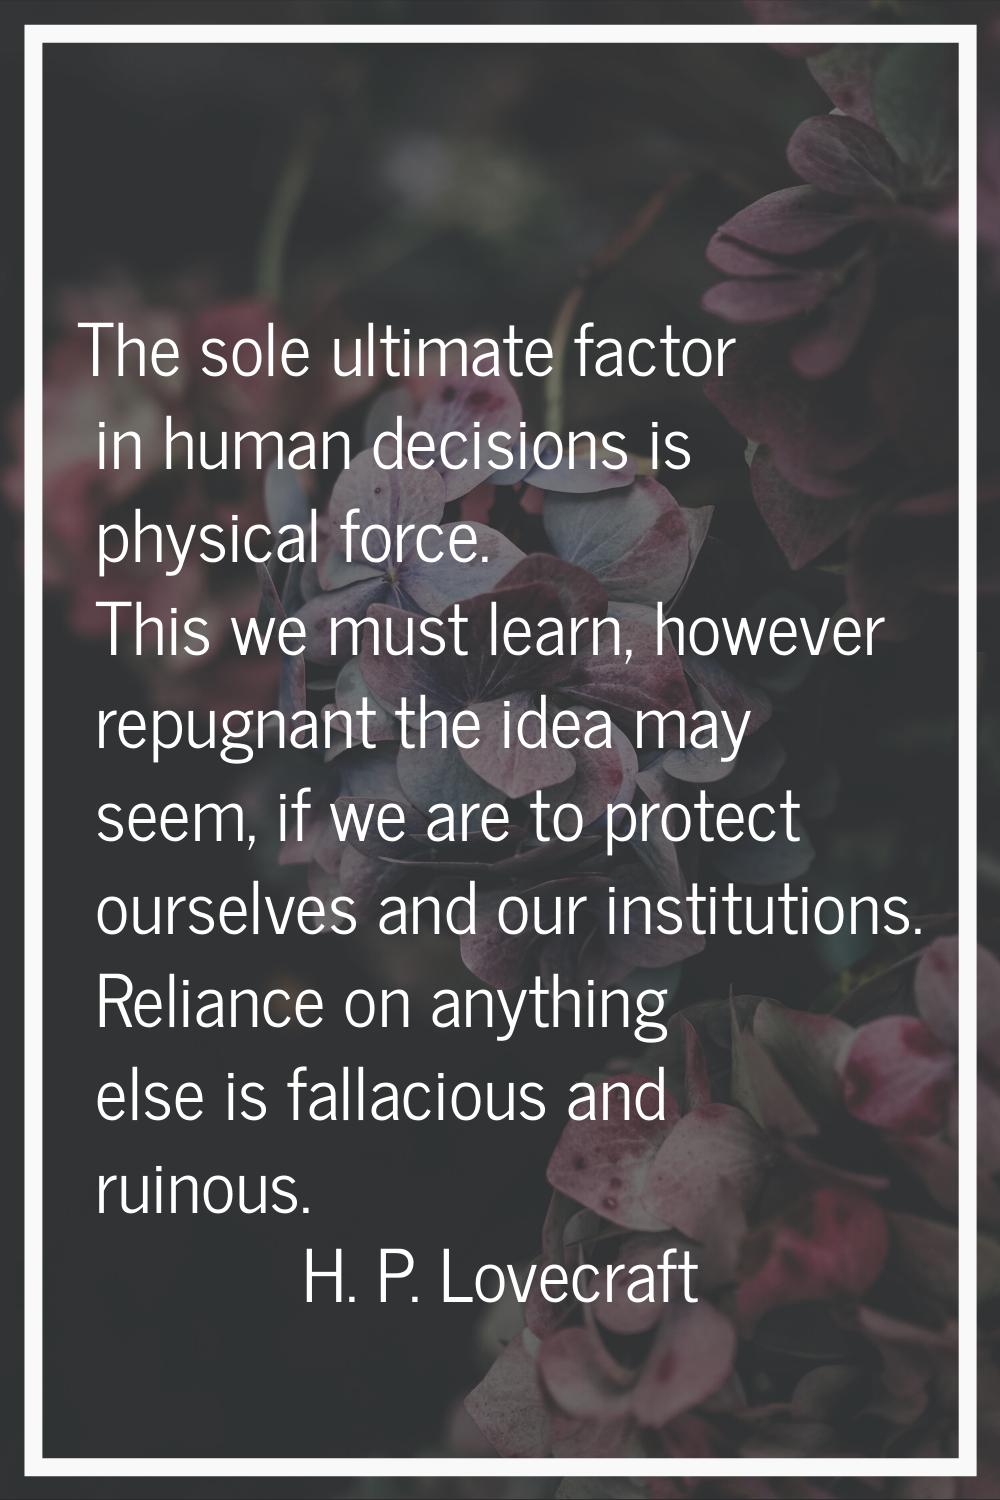 The sole ultimate factor in human decisions is physical force. This we must learn, however repugnan